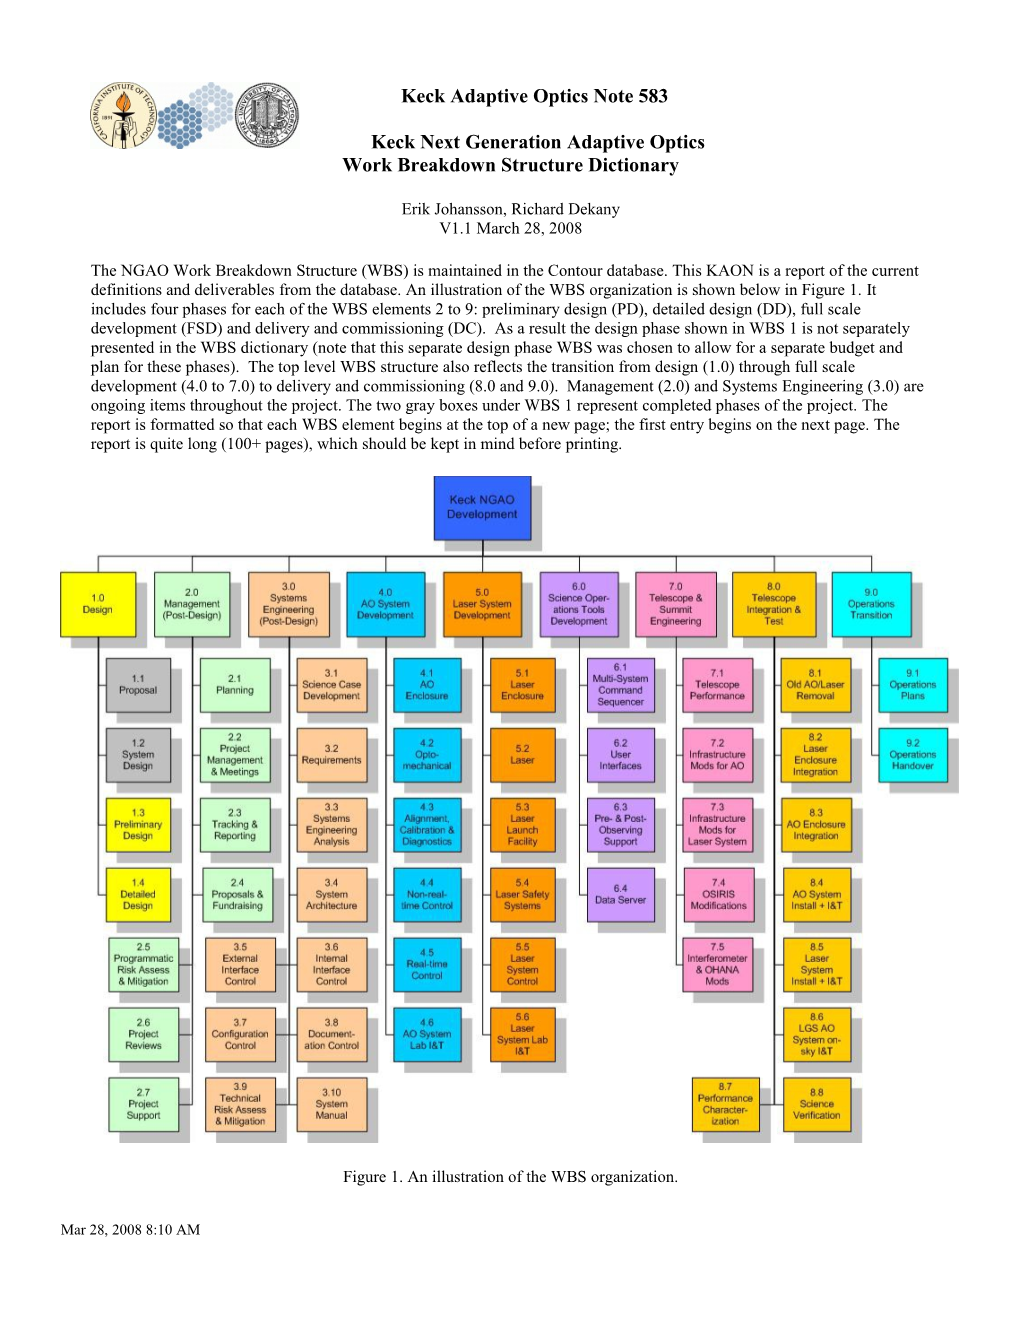 Work Breakdown Structure Dictionary